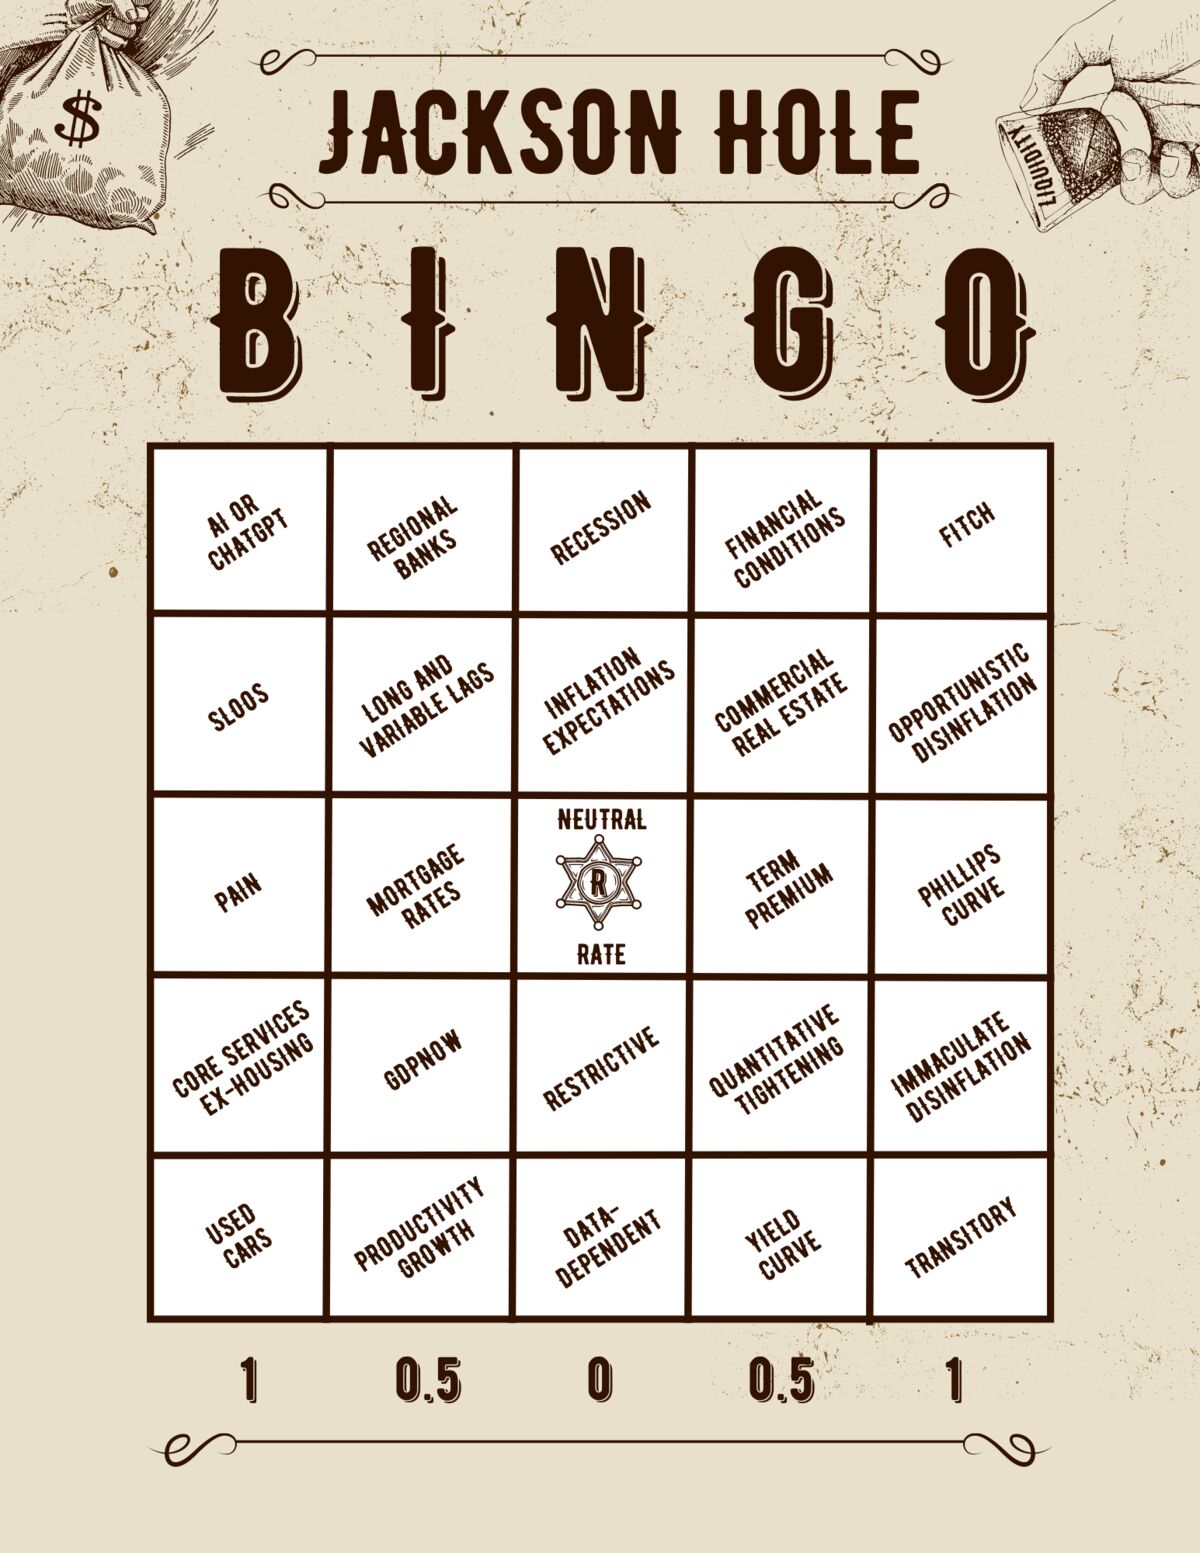 AS WORLD CENTRAL BANKERS GATHER, PLAY ALONG WITH JACKSON HOLE BINGO